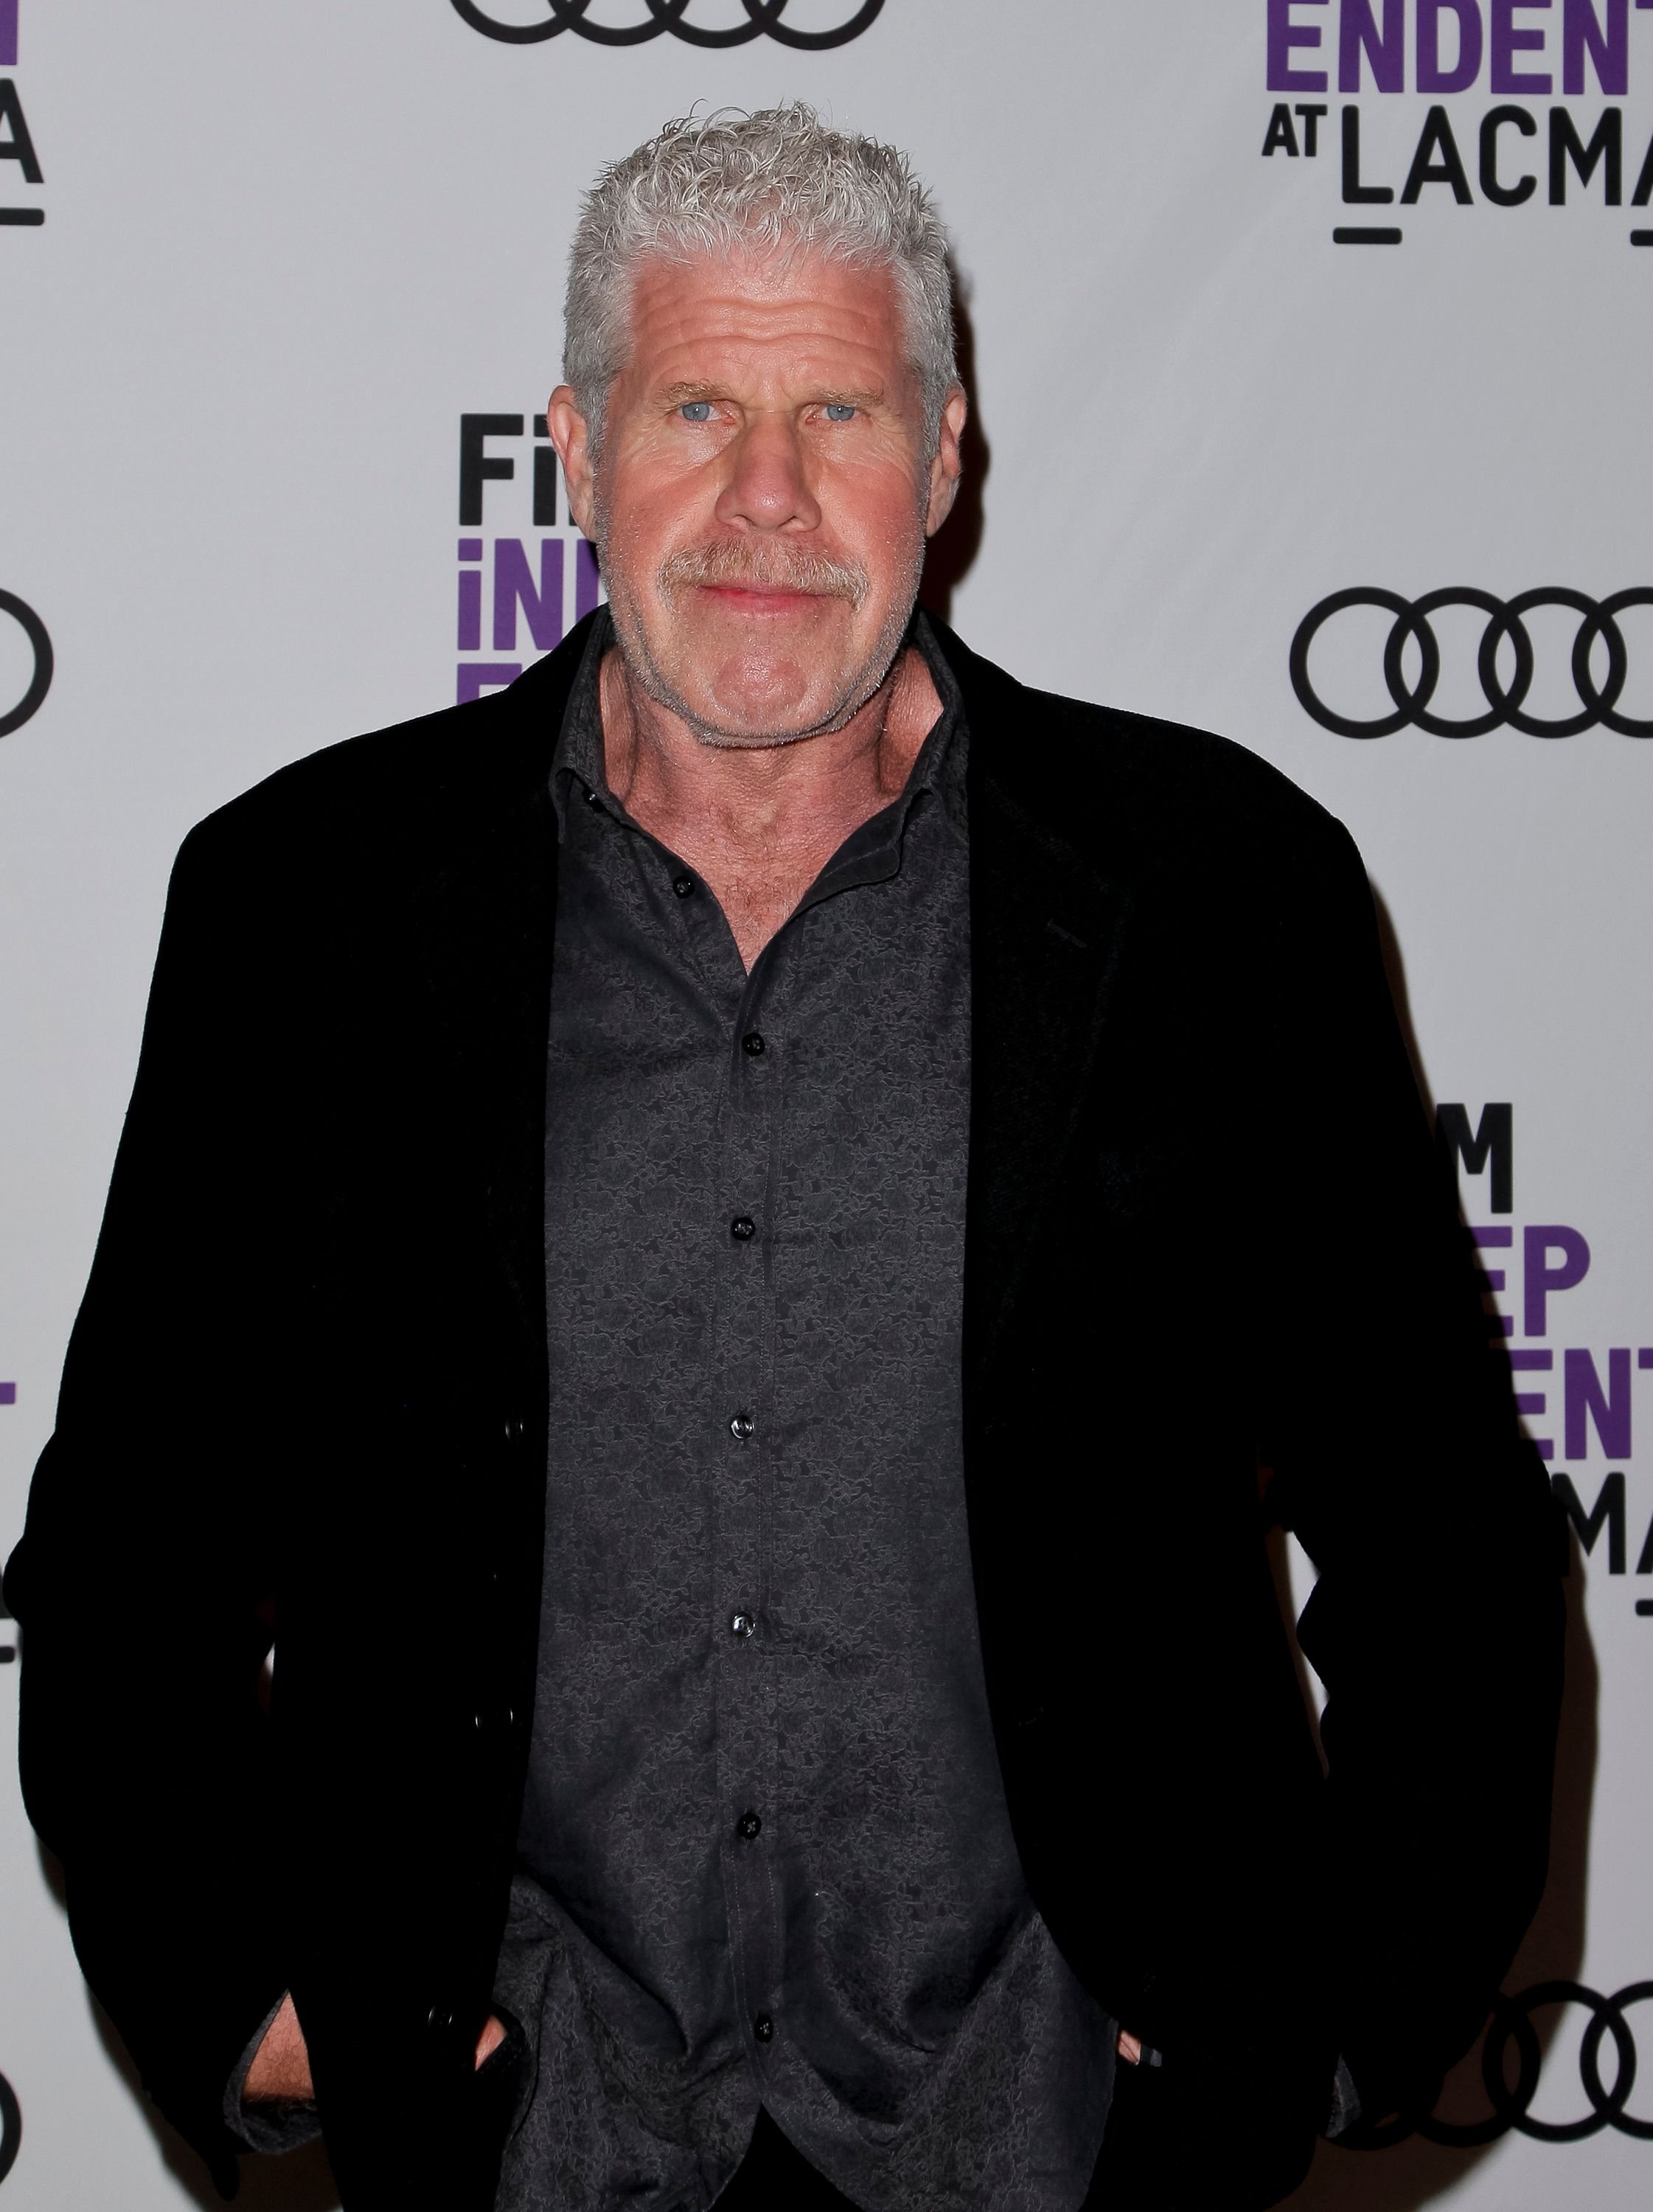 Ron Perlman attends the screening of 'StartUp' at Bing Theater At LACMA on September 28, 2017 in Los Angeles, California. | Source: Getty Images